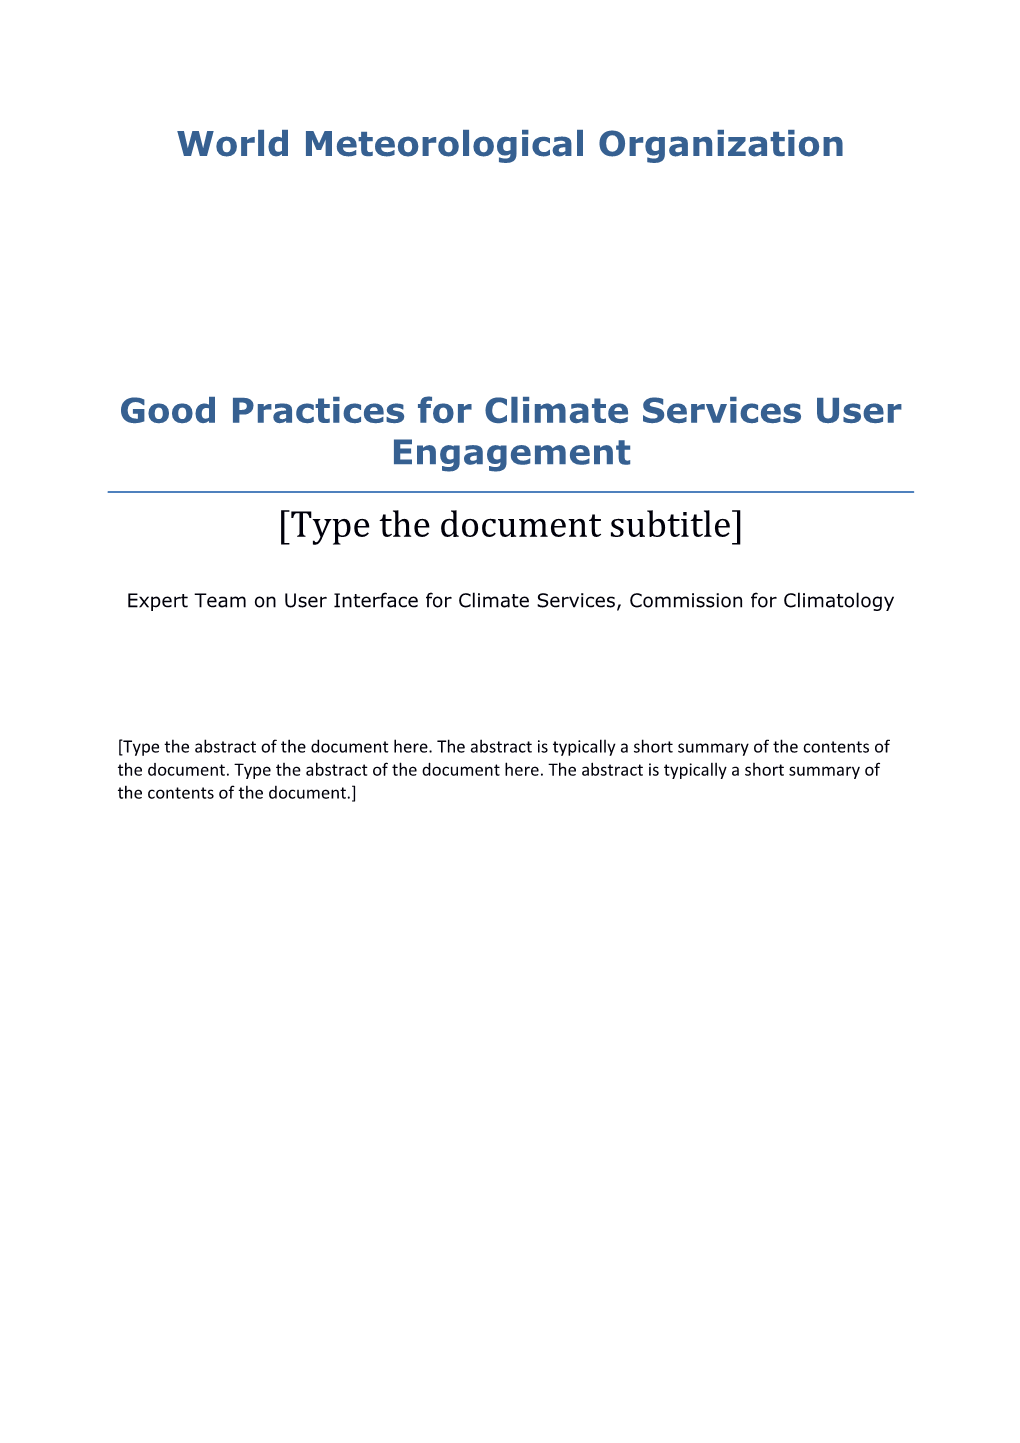 Good Practices for Climate Services User Engagement